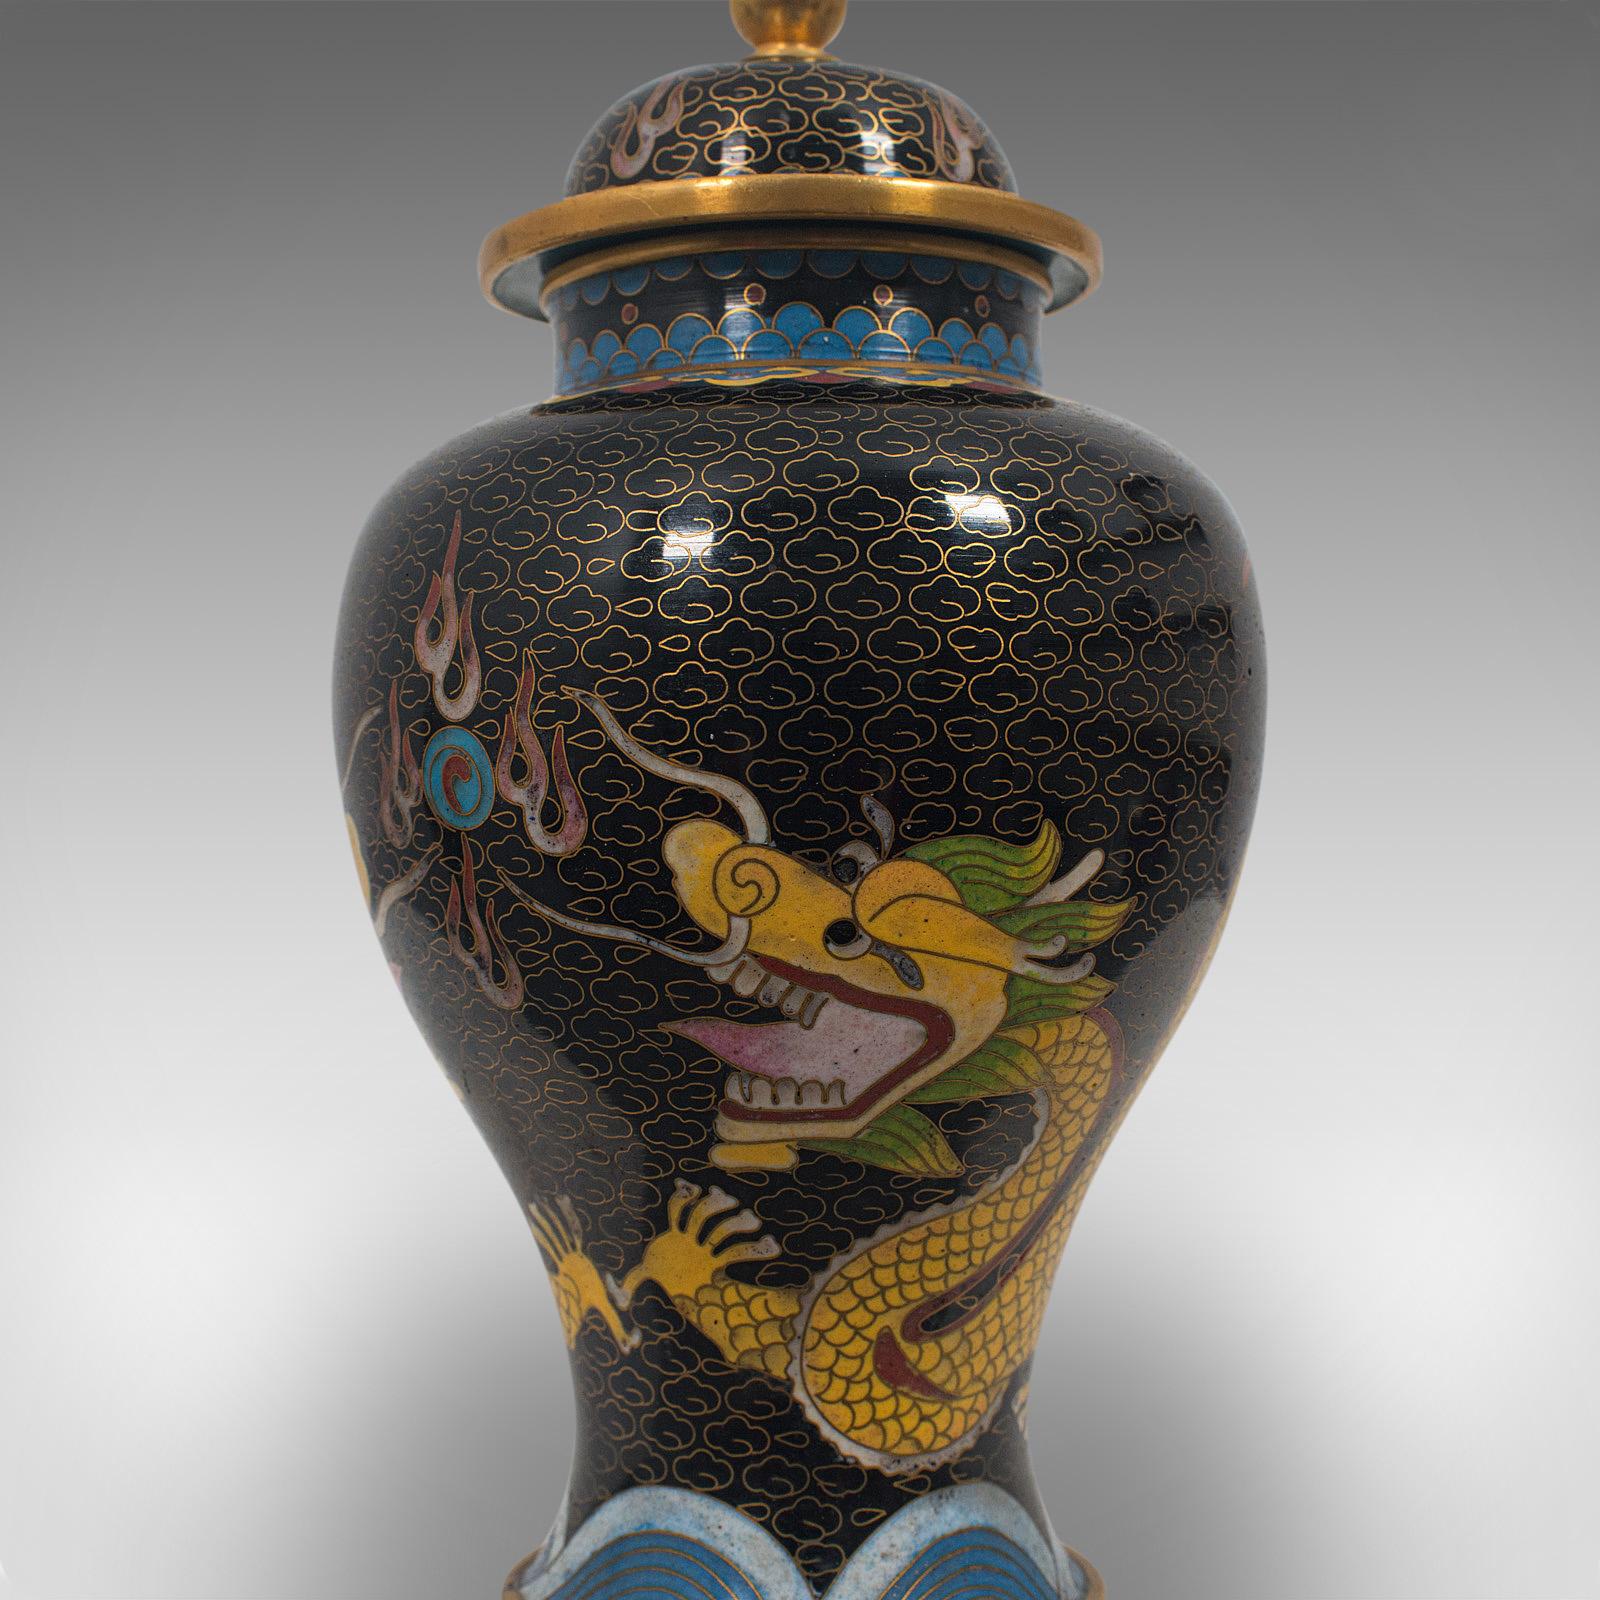 Antique Decorative Spice Jars, Chinese, Cloisonné, Baluster Urn circa 1900, Pair For Sale 5